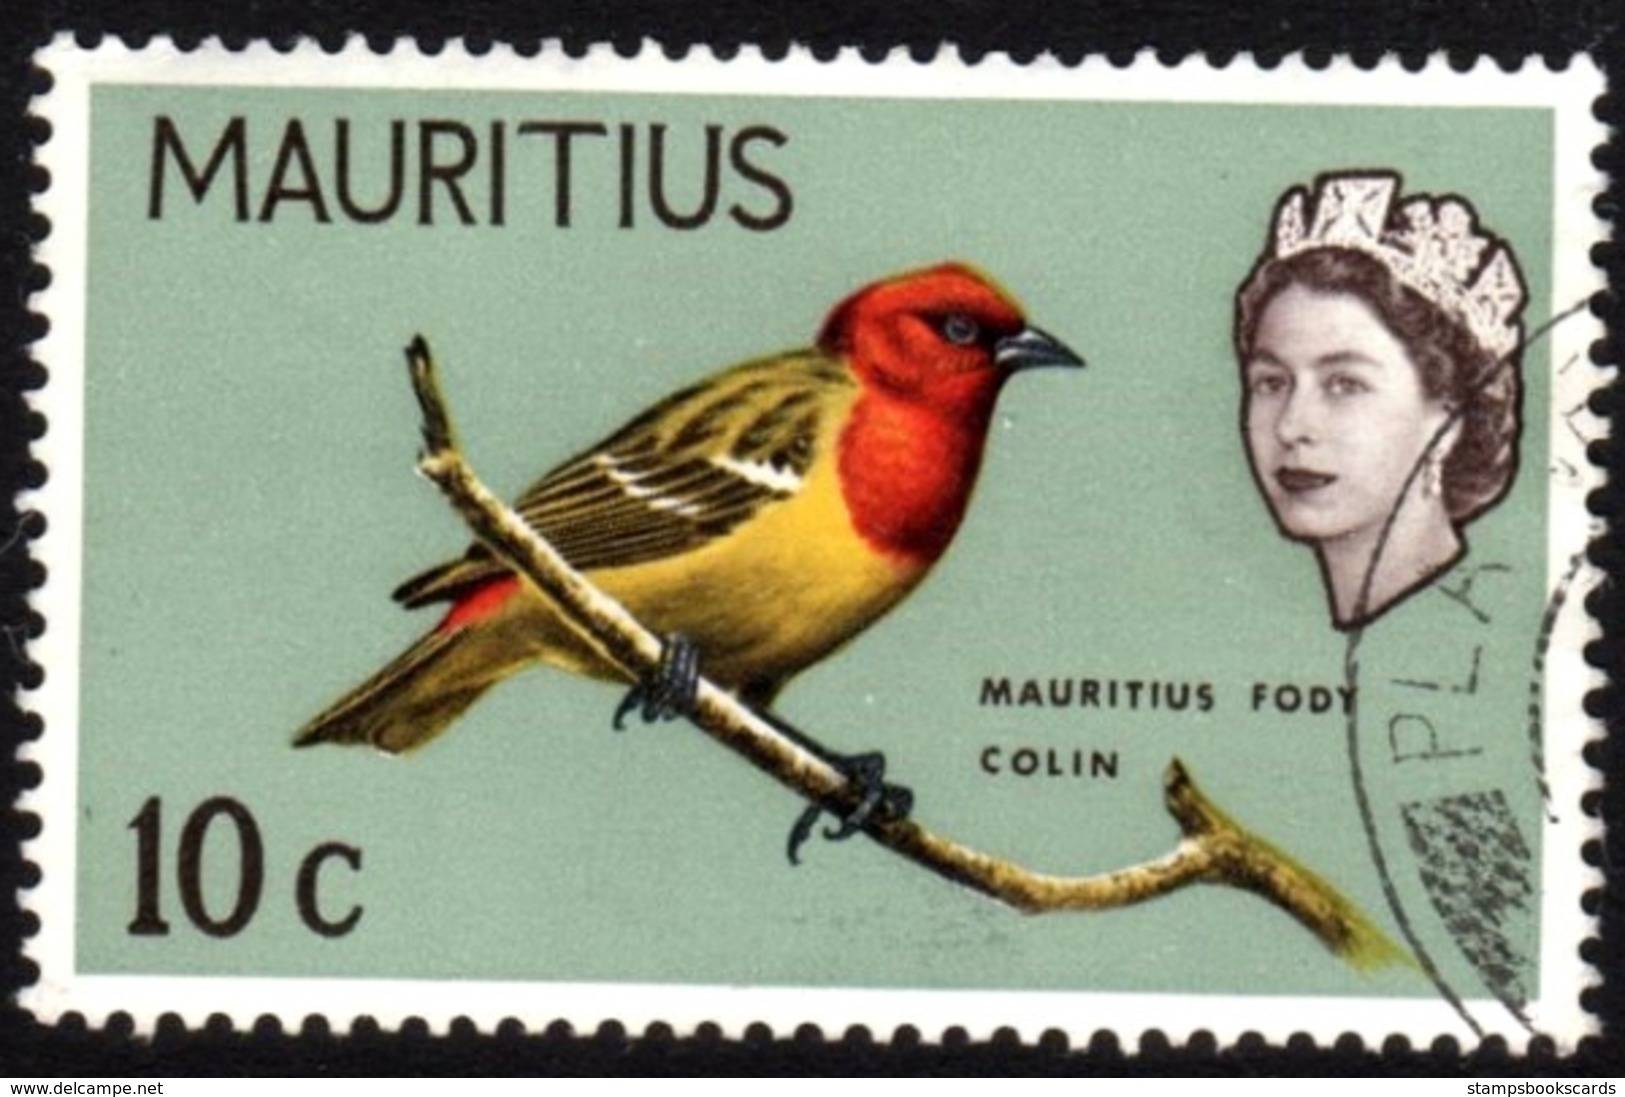 Mauritius Fody Colin Fine Used Stamp - Songbirds & Tree Dwellers